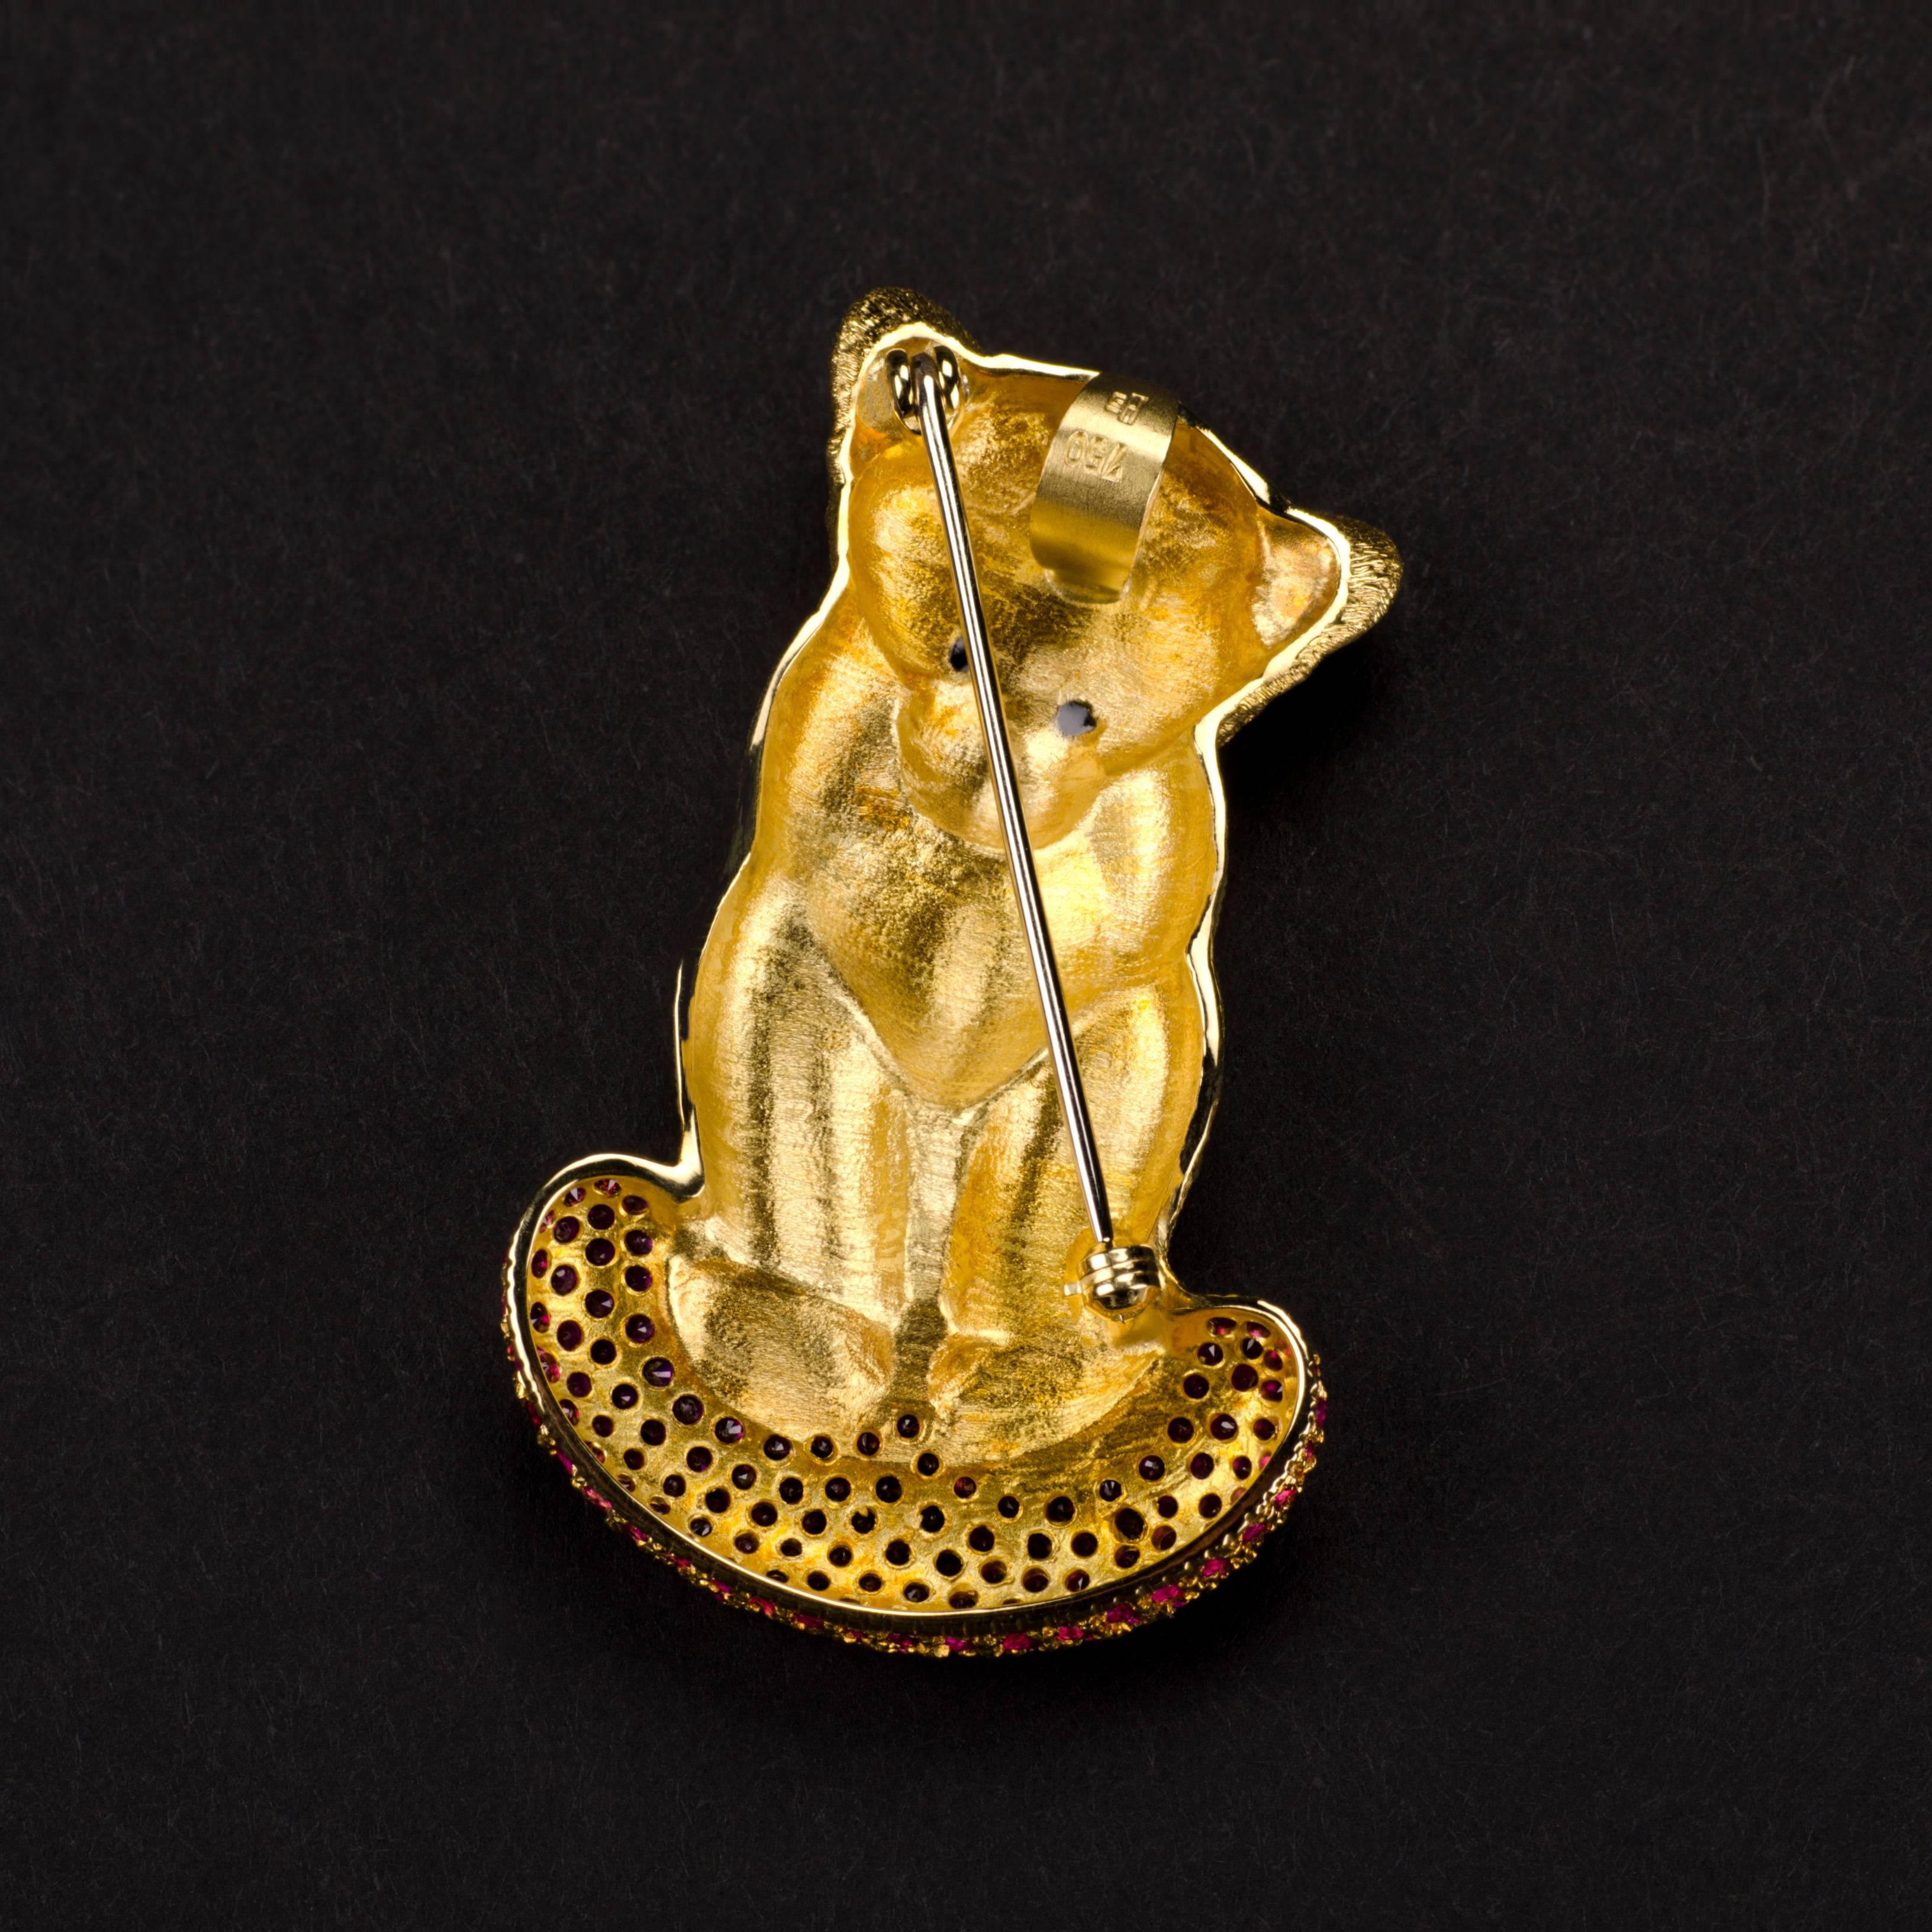 18 Carat Yellow Gold Lion Cub Brooch or Pendant with a Cushion of Rubies For Sale 1